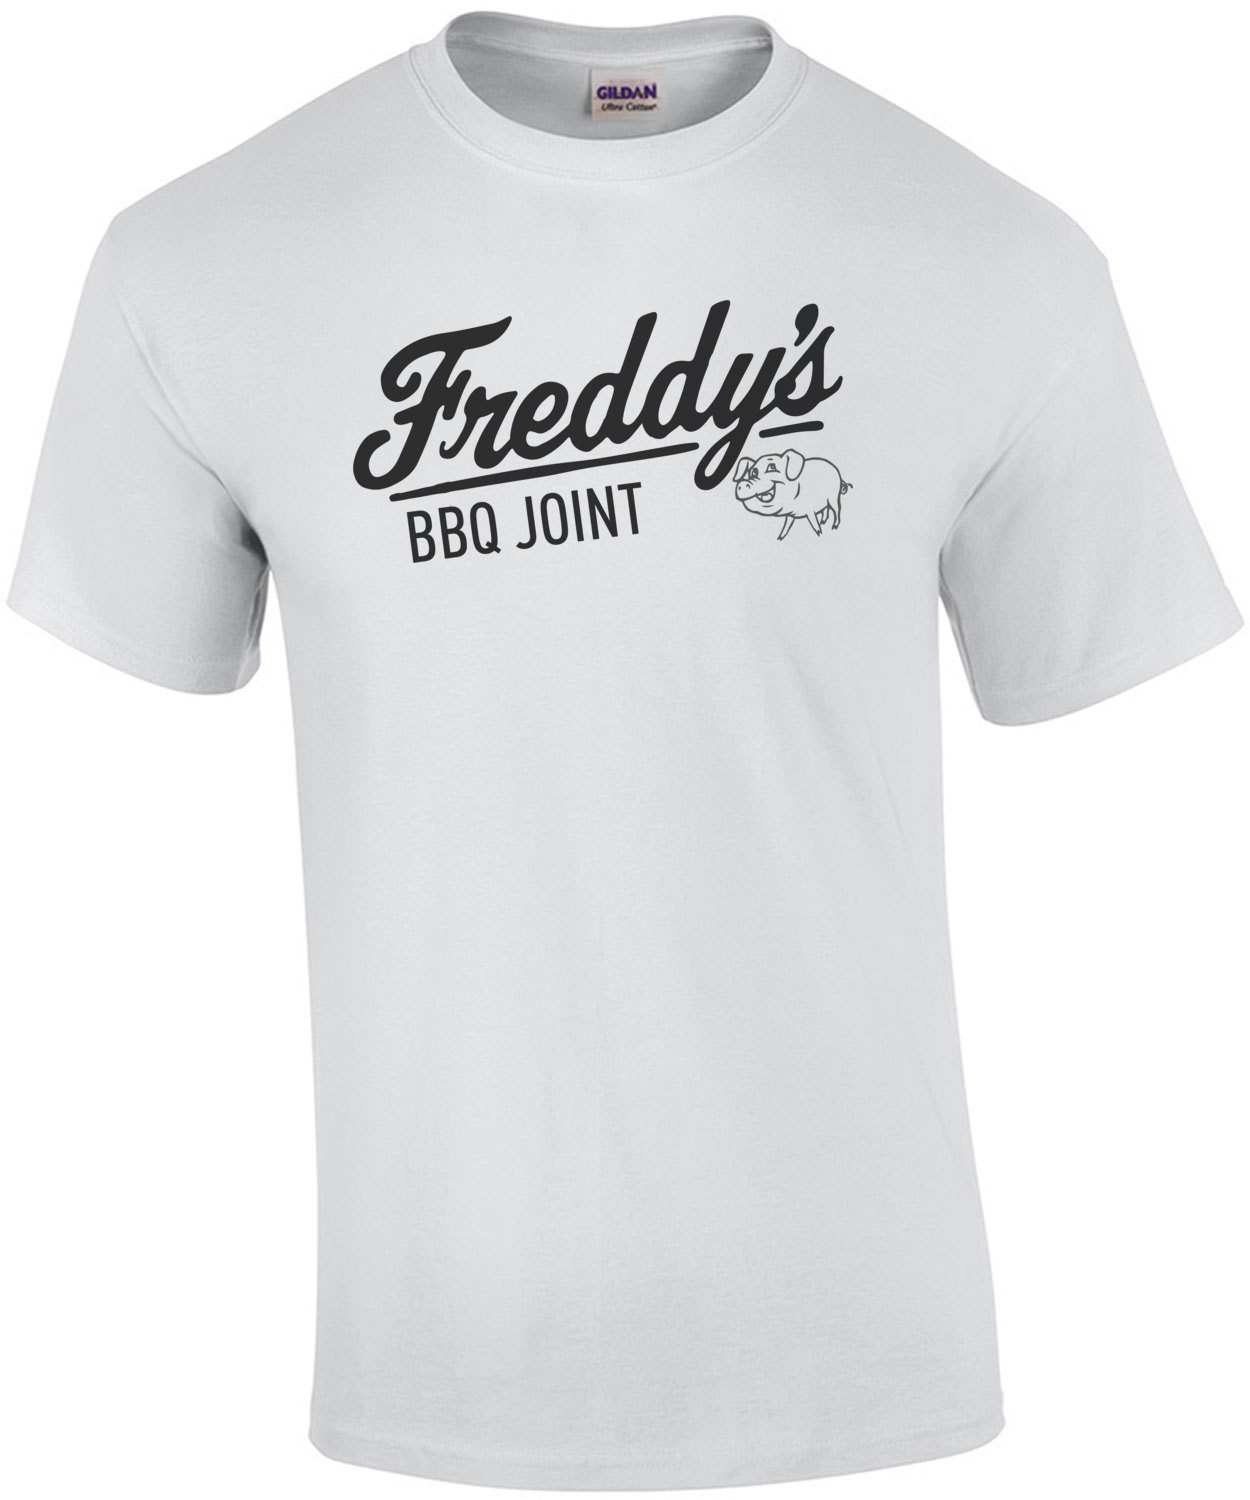 freddy's bbq joint - house of cards t-shirt